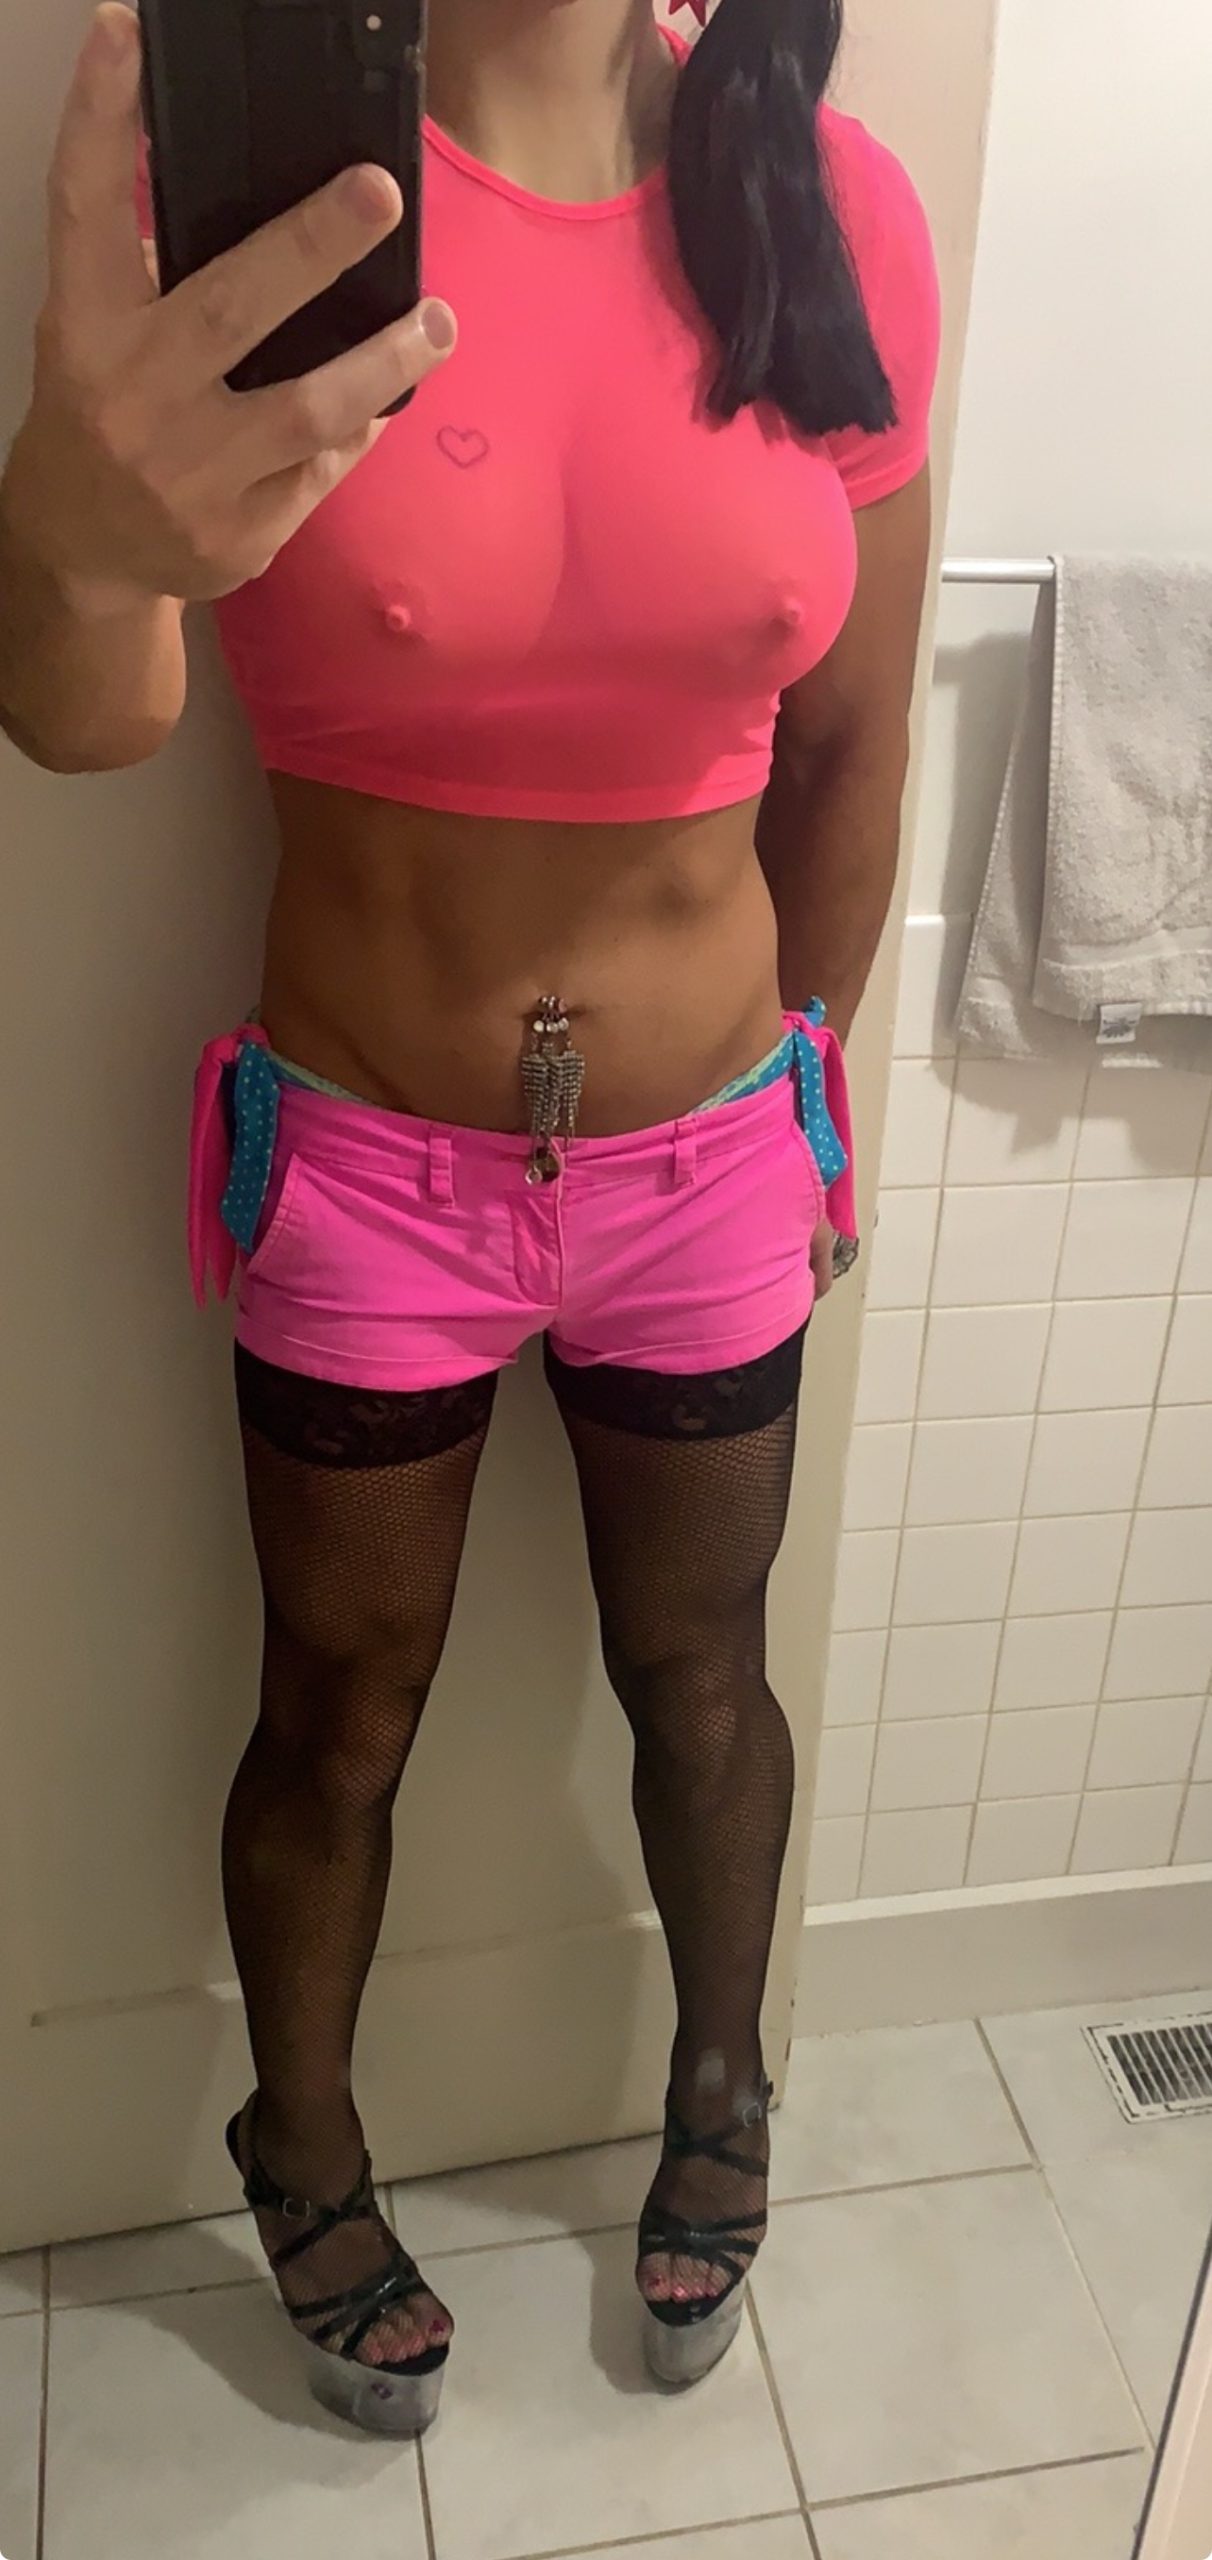 Sissy Brittney message me and post me sissy pics